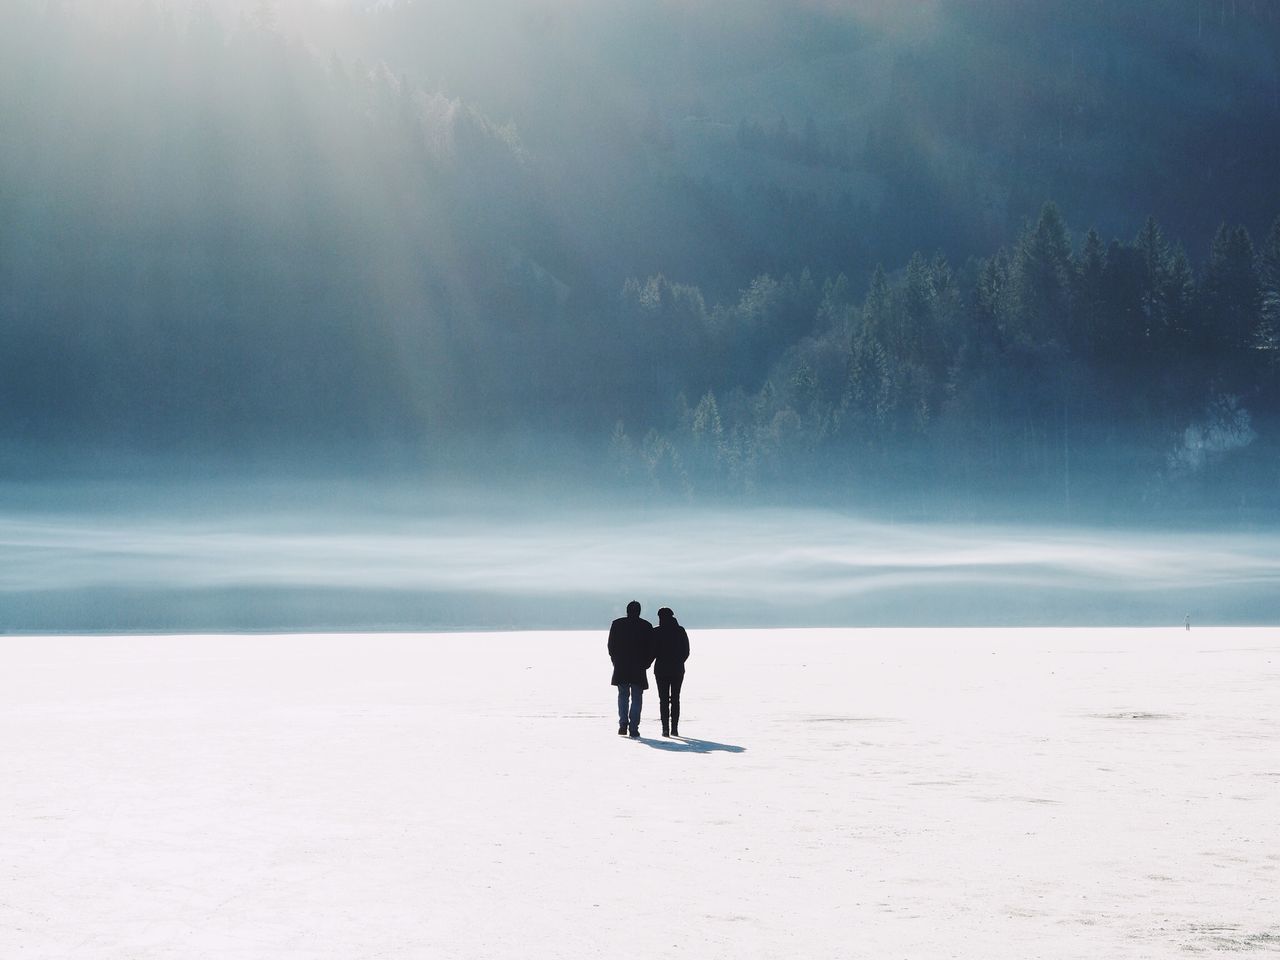 rear view, full length, two people, snow, cold temperature, winter, outdoors, sky, silhouette, nature, people, mammal, adult, day, snowing, adults only